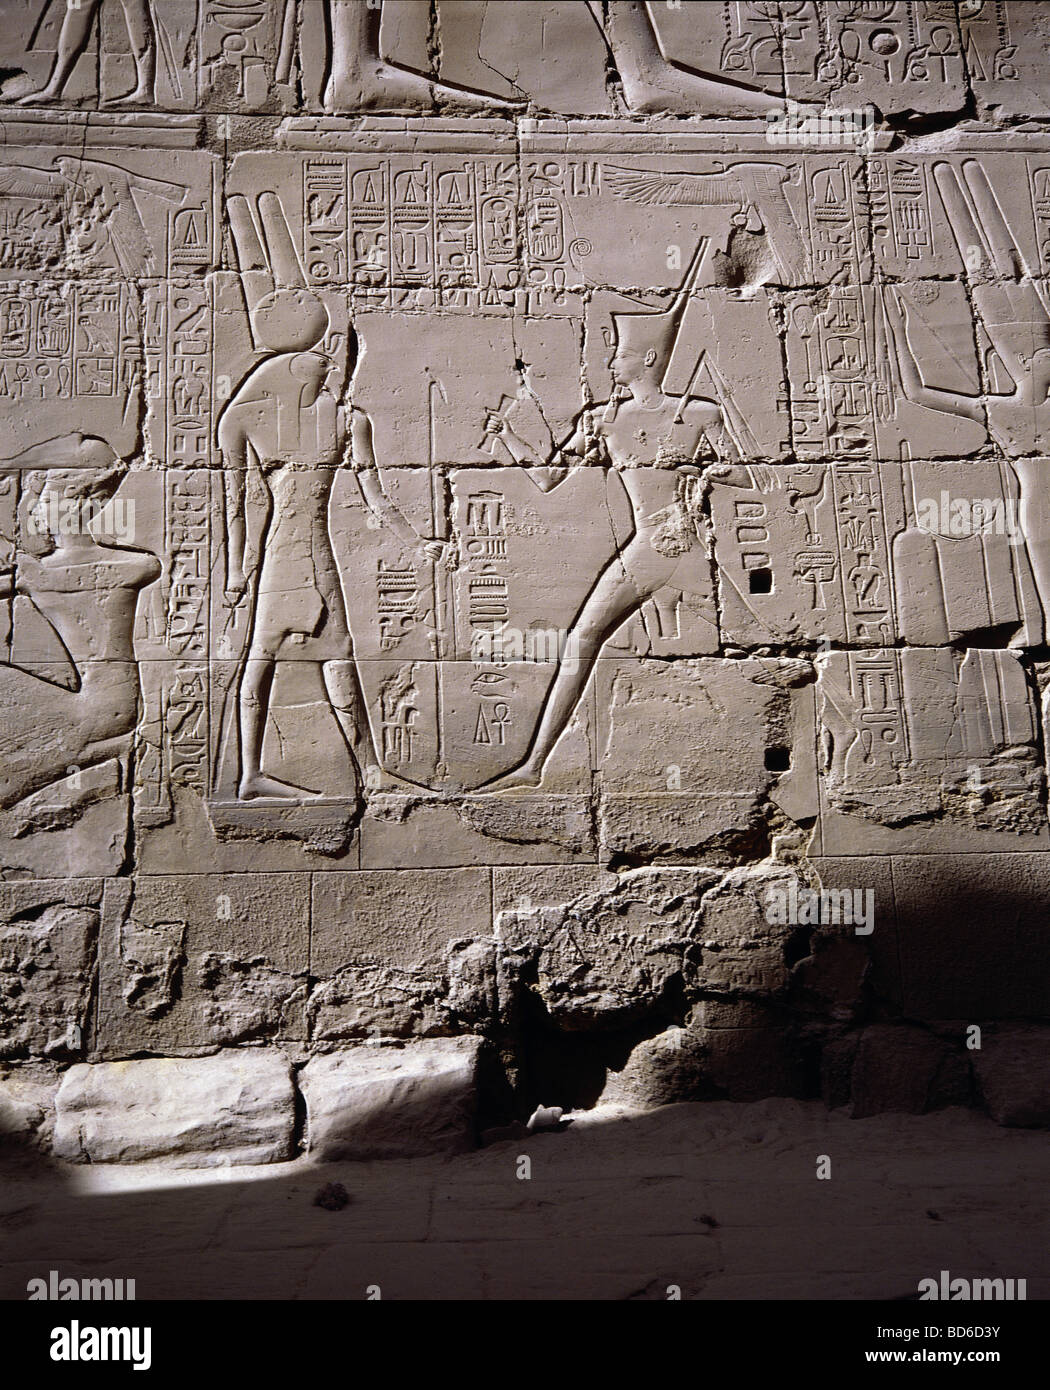 geography / travel, Egypt, Karnak, Temple of Amun-Re, King Ramesses II (circa 1290 - 1224 BC, 19th Dynasty) and God Menthu, relief, Great Hypostyle Hall, New Kingdom, Amun, Re, excavation, Thebes, ancient world, antiquity, fine arts, sculpture, religion, Africa, historic, historical, UNESCO World Cultural Heritage Site / Sites, ancient world, Stock Photo